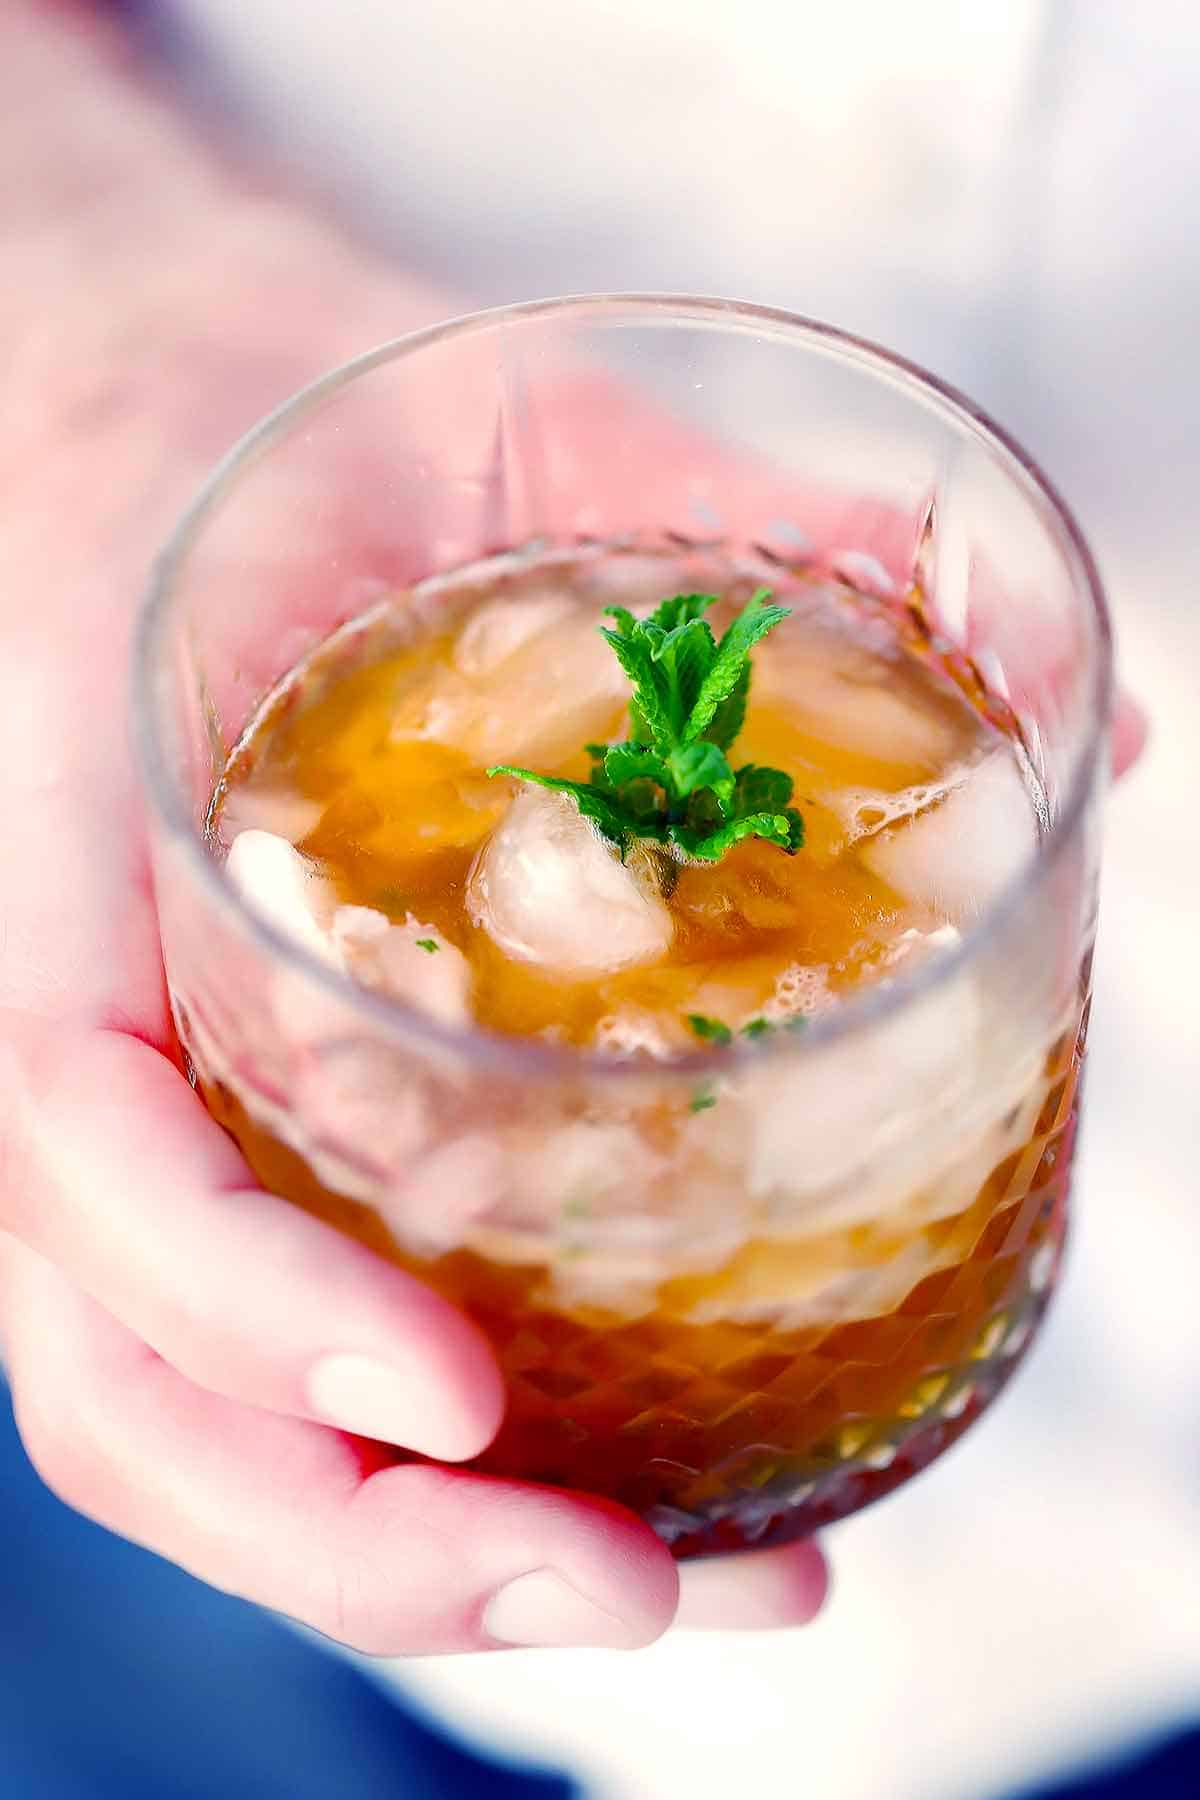 A mint julep whiskey cocktail with fresh mint being held.